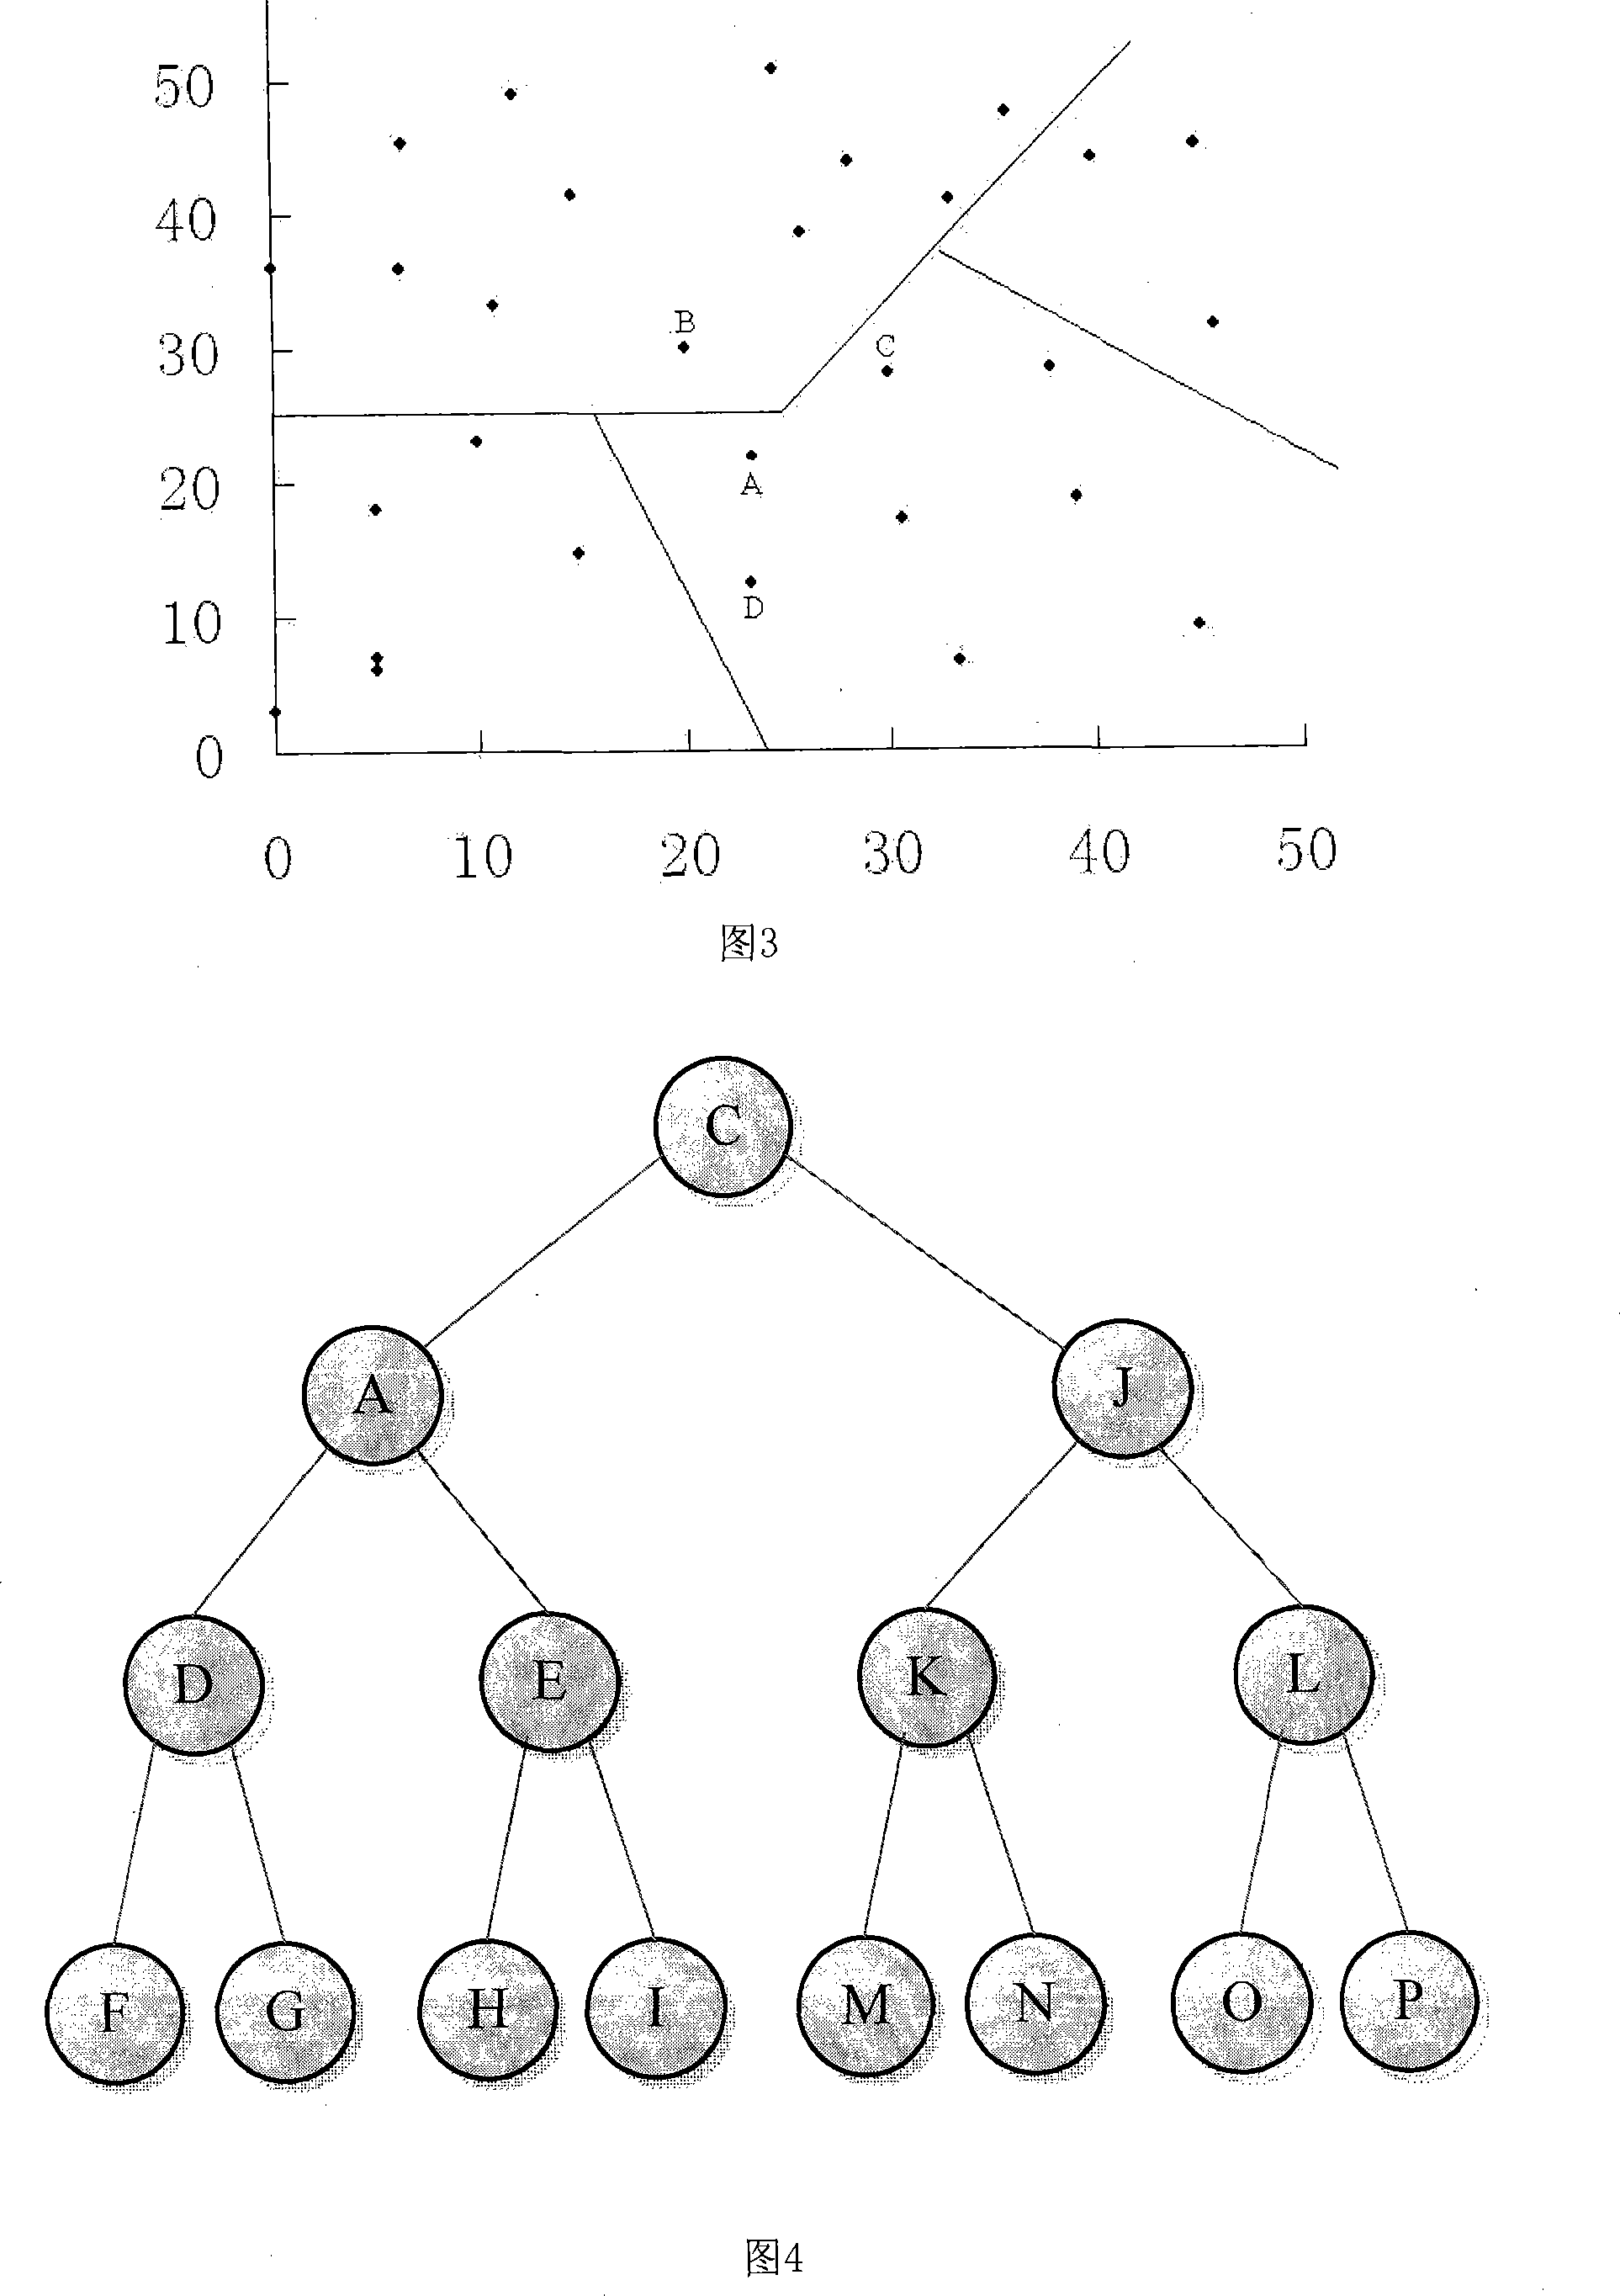 Method for identifying the section energy balance route of wireless sensor network based on 2-child tree